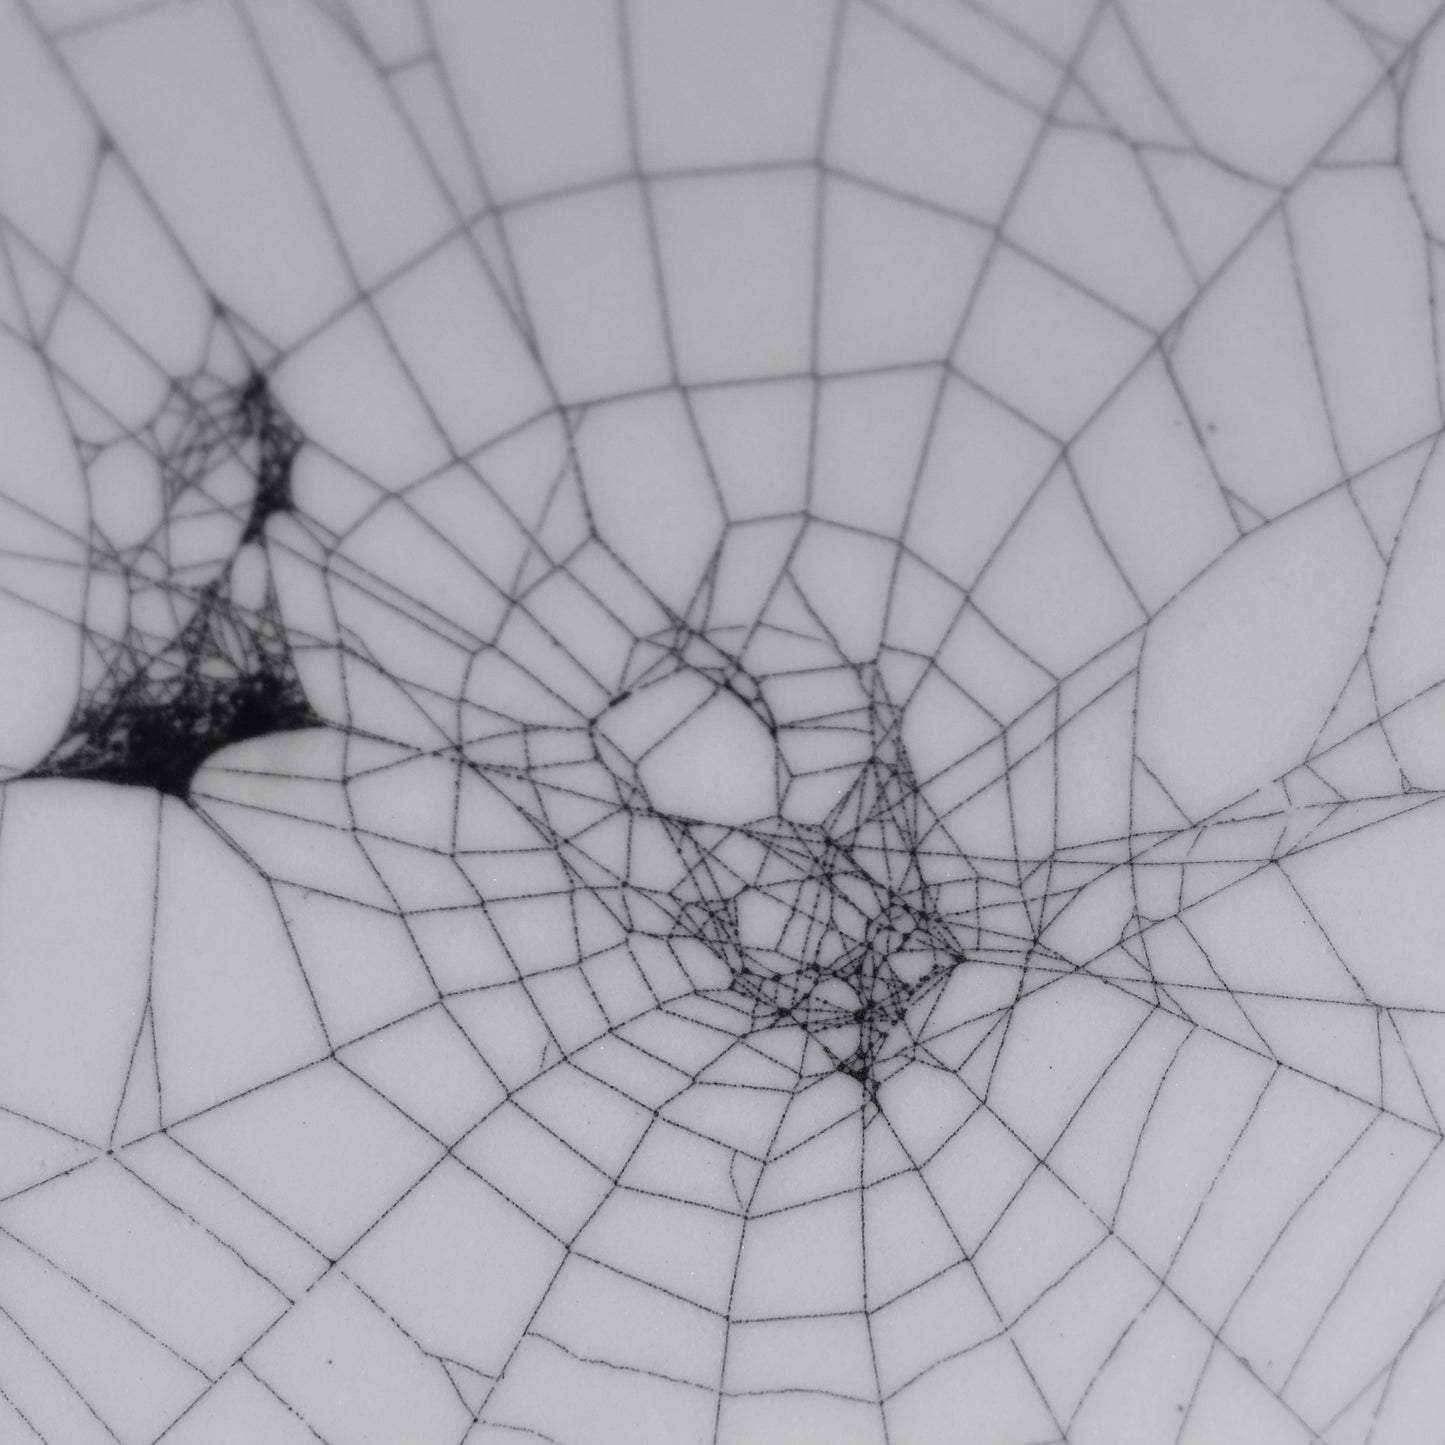 Web on Clay (281), Web Collected October 15, 2022